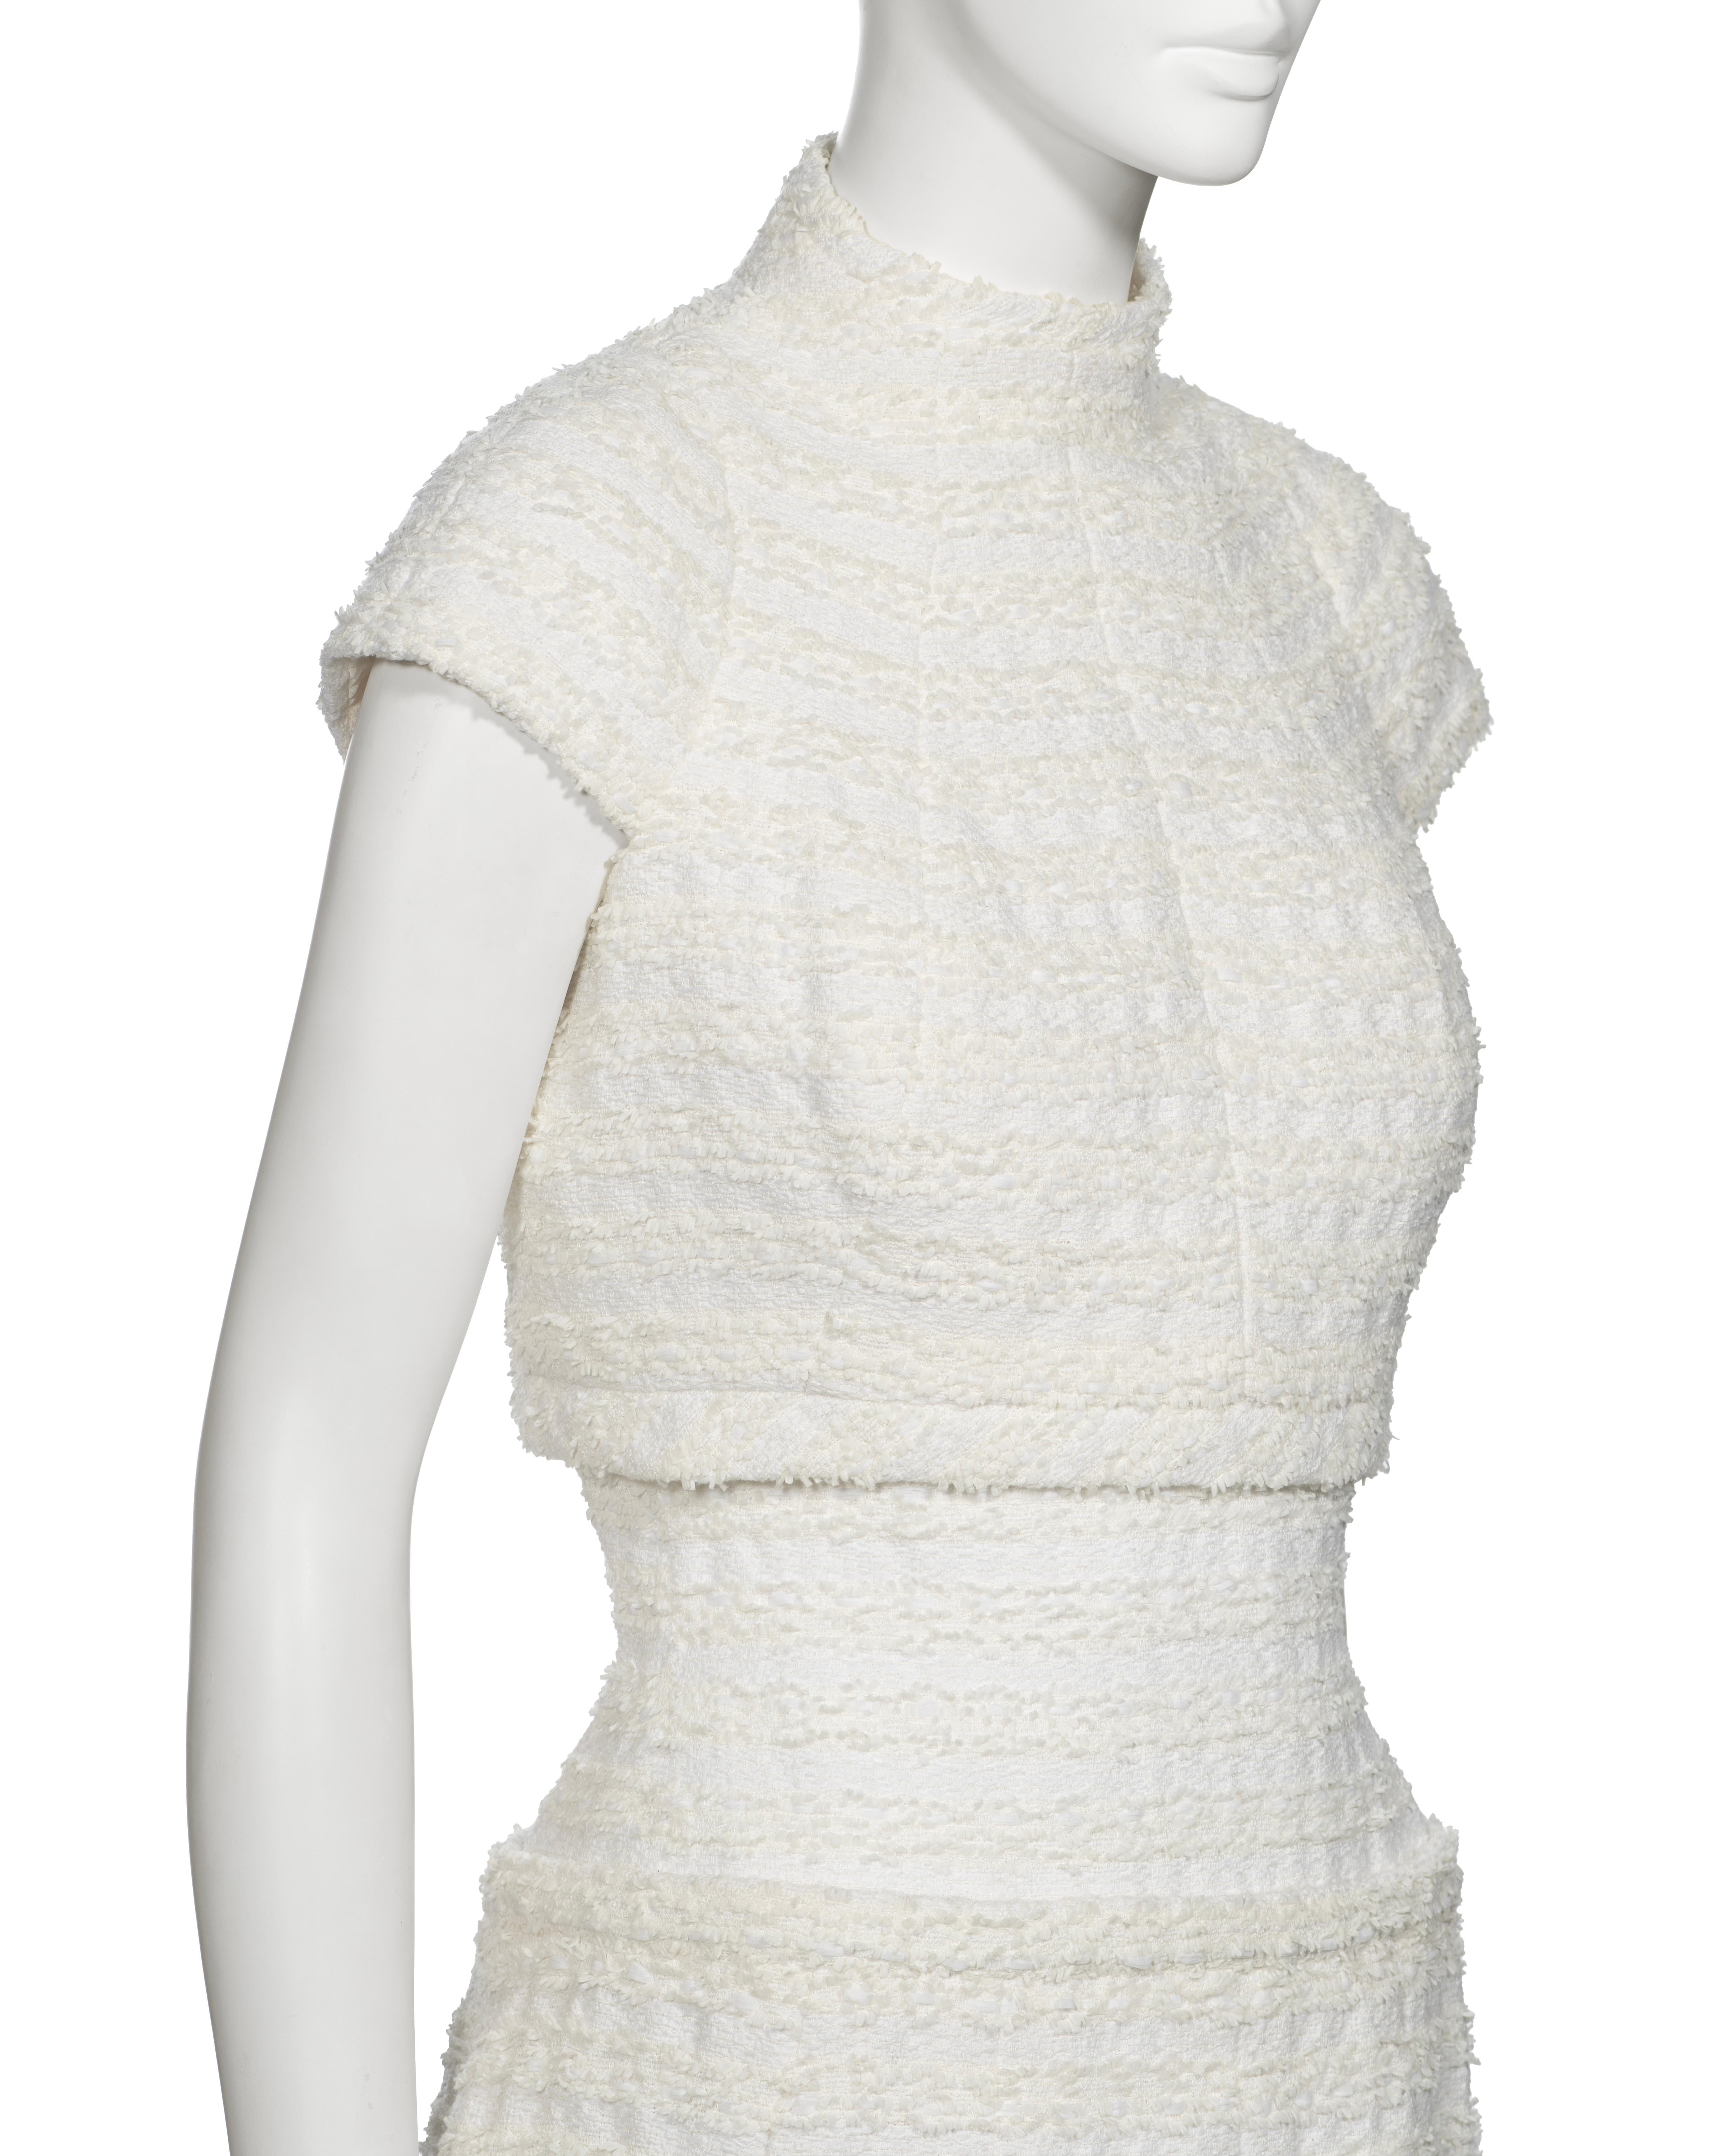 Chanel by Karl Lagerfeld Haute Couture White Bouclé Corseted Skirt Suit, ss 2014 For Sale 2